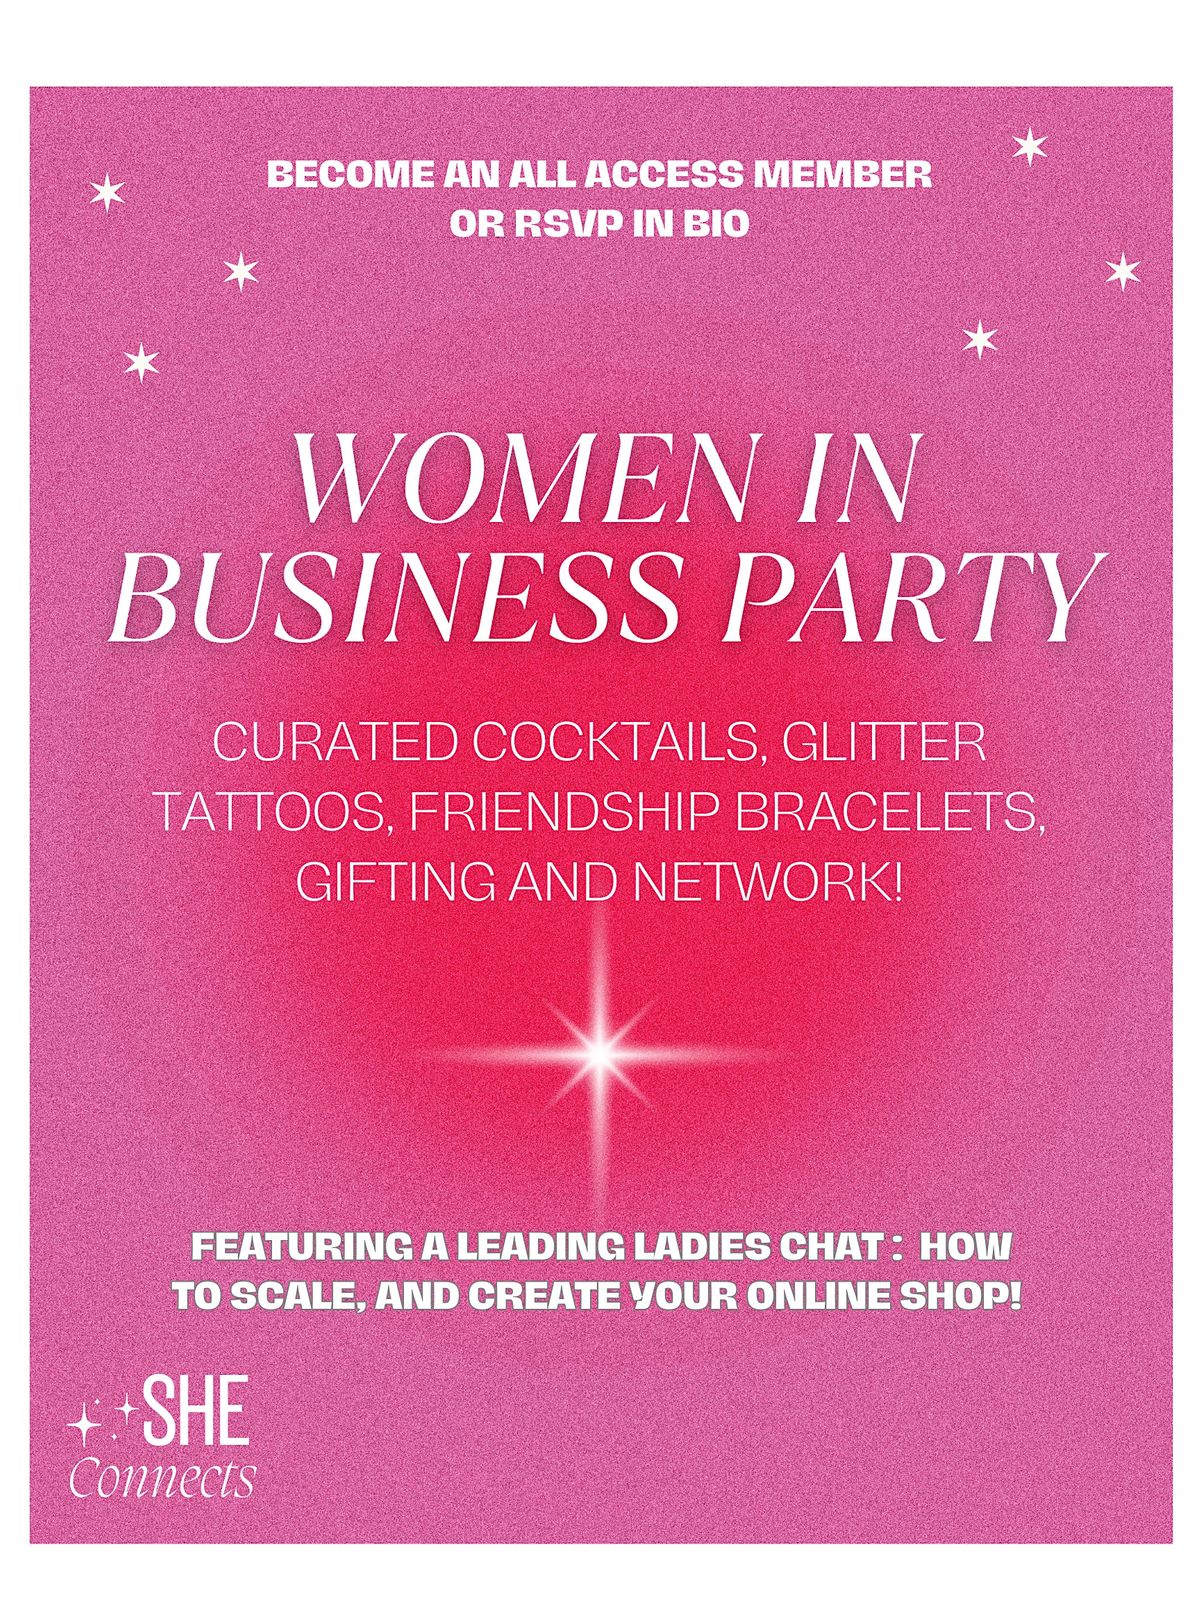 Women In Business Party - Glitter Tattoos, Cocktails, Networking, Gifting